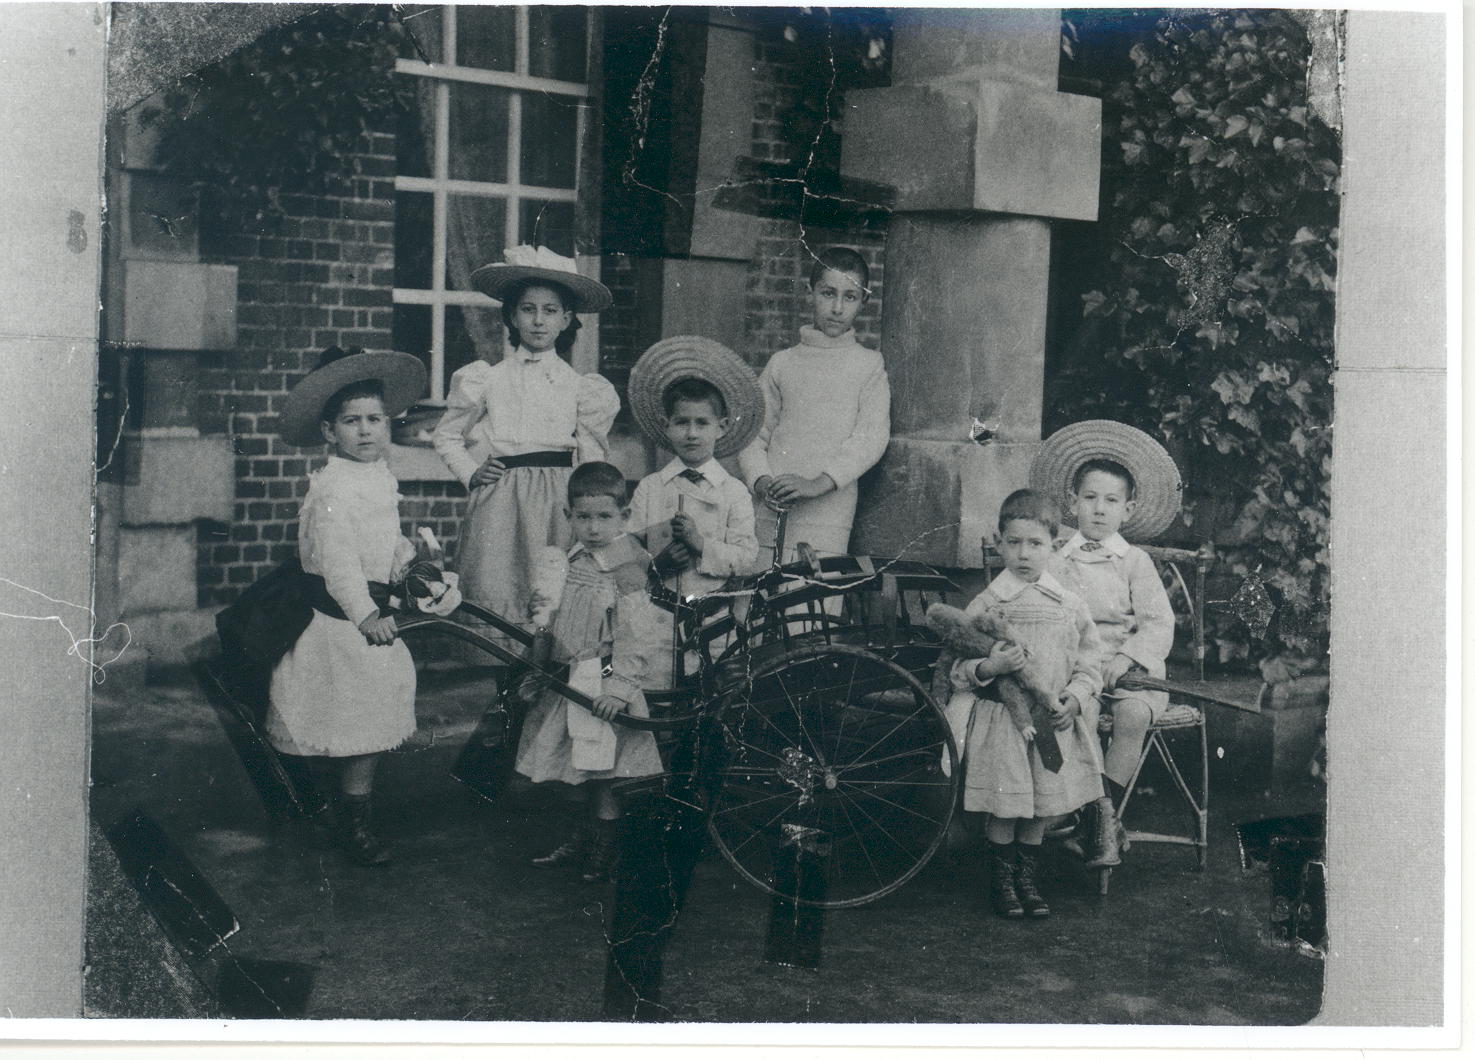 The seven children of Joseph and Louise Sassoon photographed outside Ashley Park c. 1897. They are (left-right) Mozelle, Missy, Freddy, Arthur, Totts, Teddy and David.